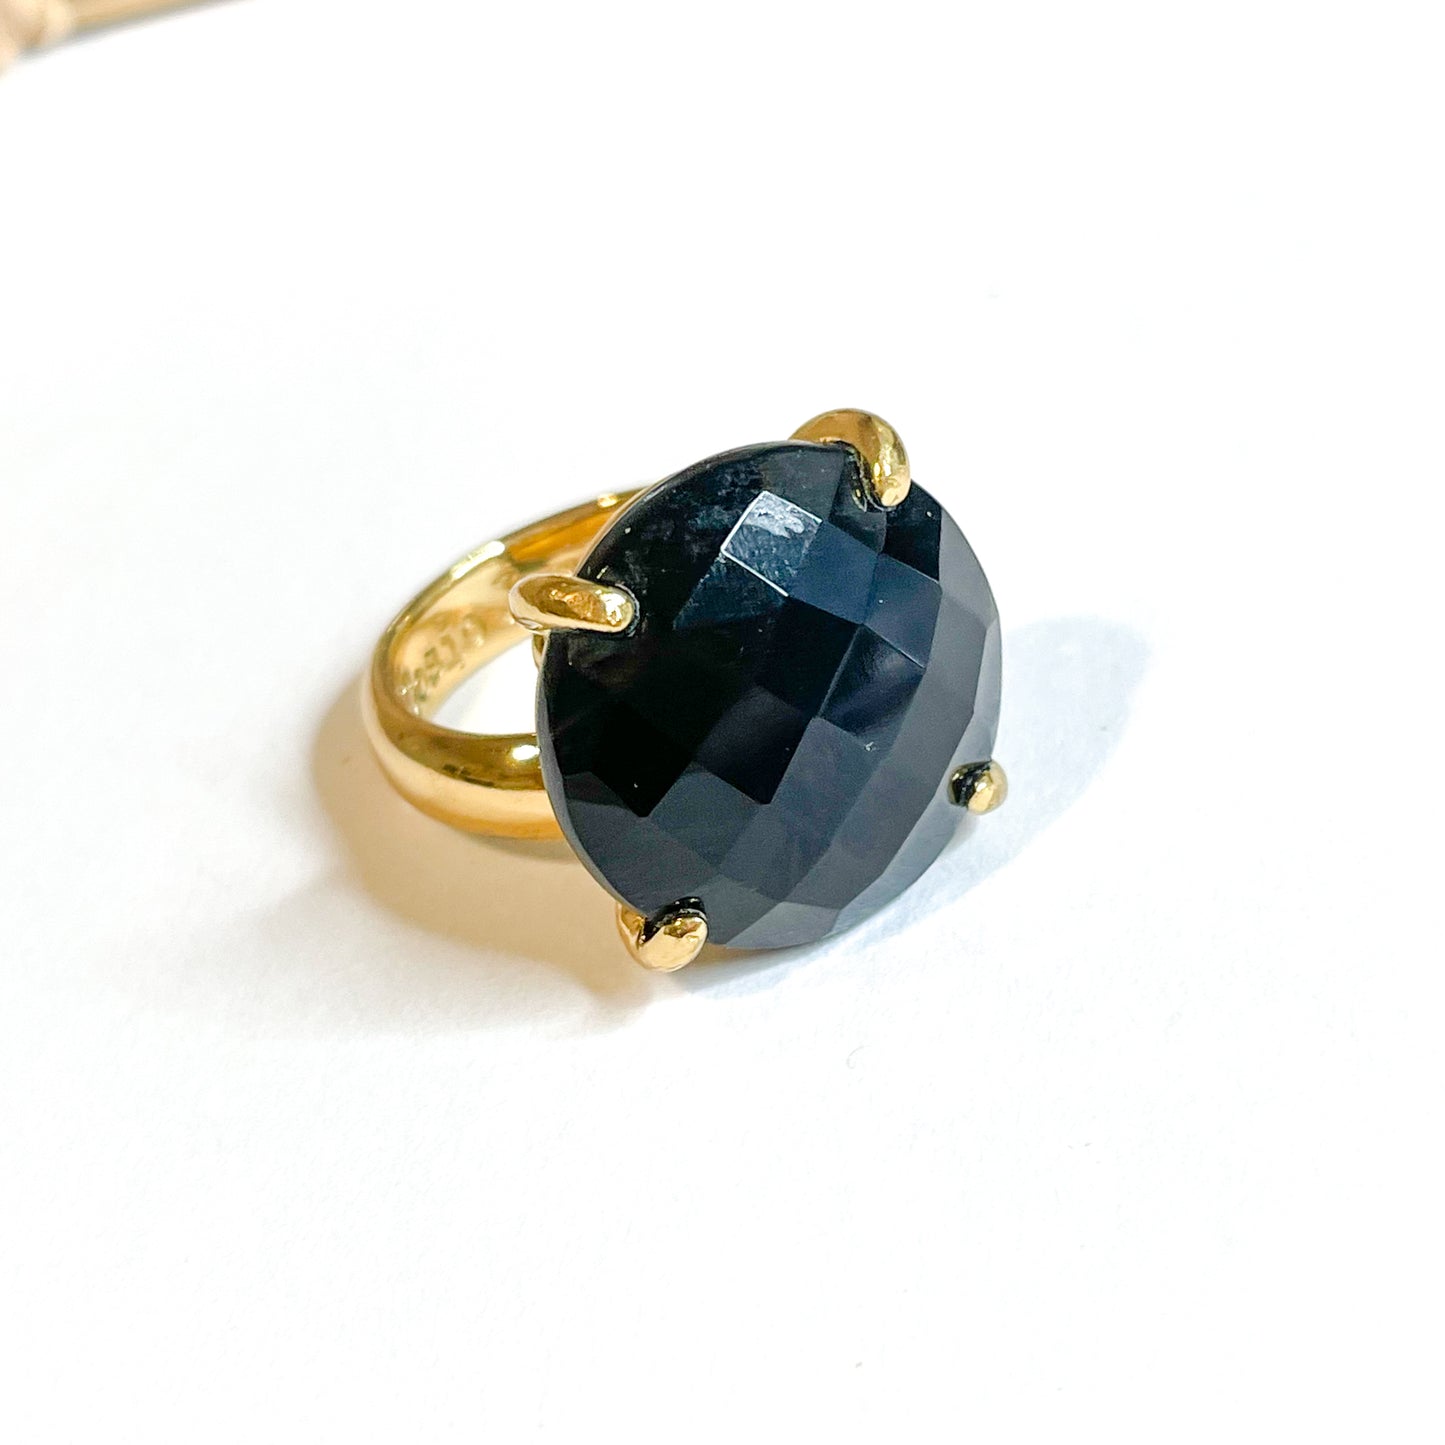 Load image into Gallery viewer, Black Onyx Polka Dot Prong Ring - Alchemia
